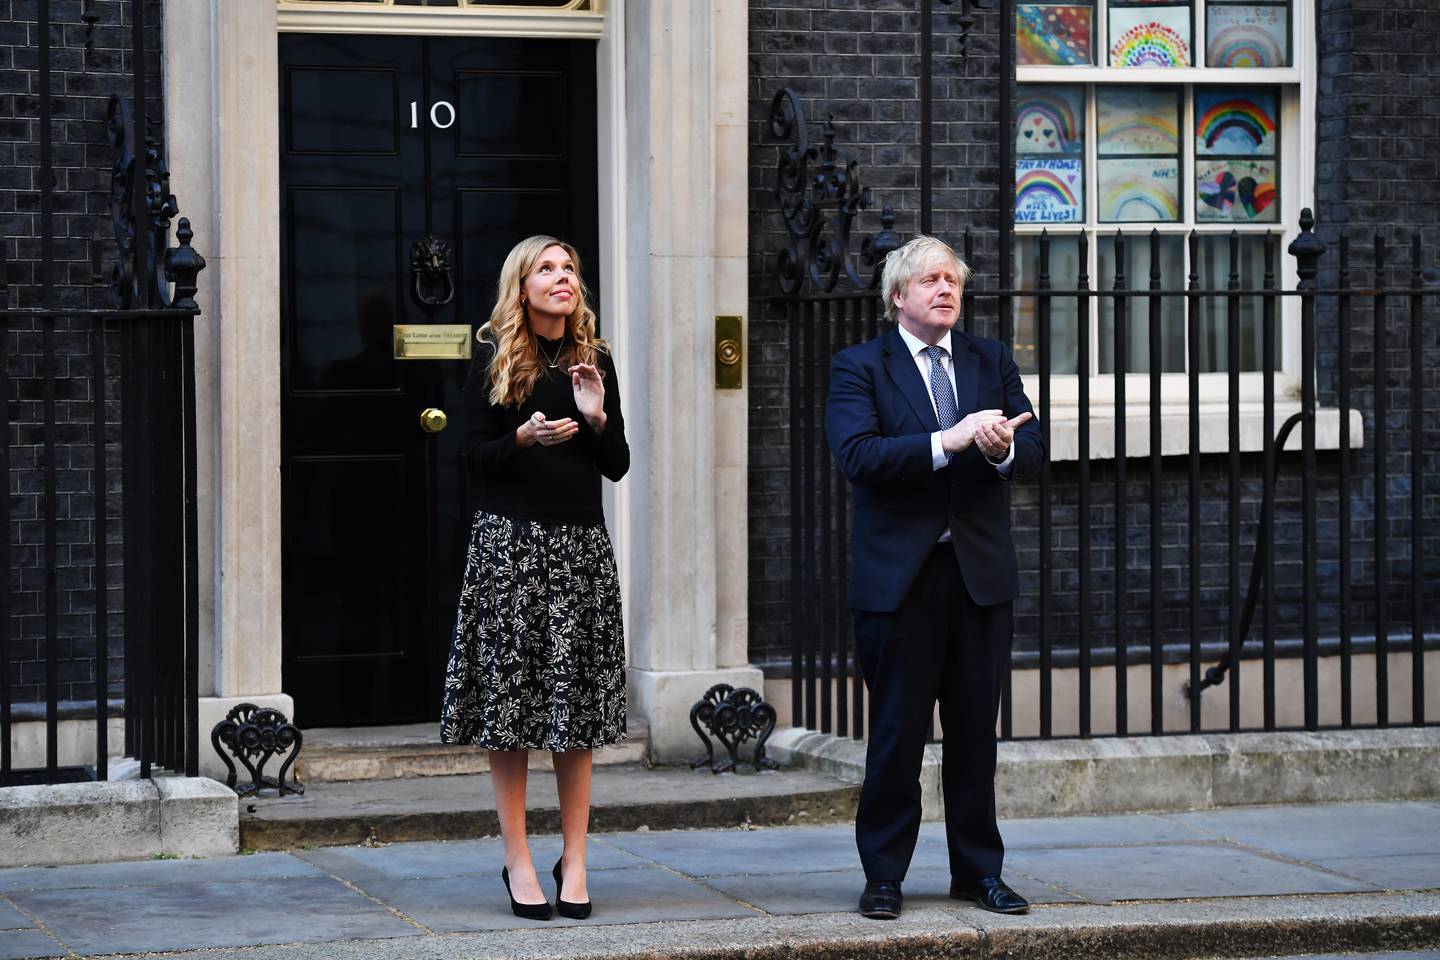 Boris Johnson and his wife Carrie outside No 10 Downing Street, which they will have to soon vacate. However, the British Prime Minister's future earnings will provide some compensation for his loss of power. Getty
